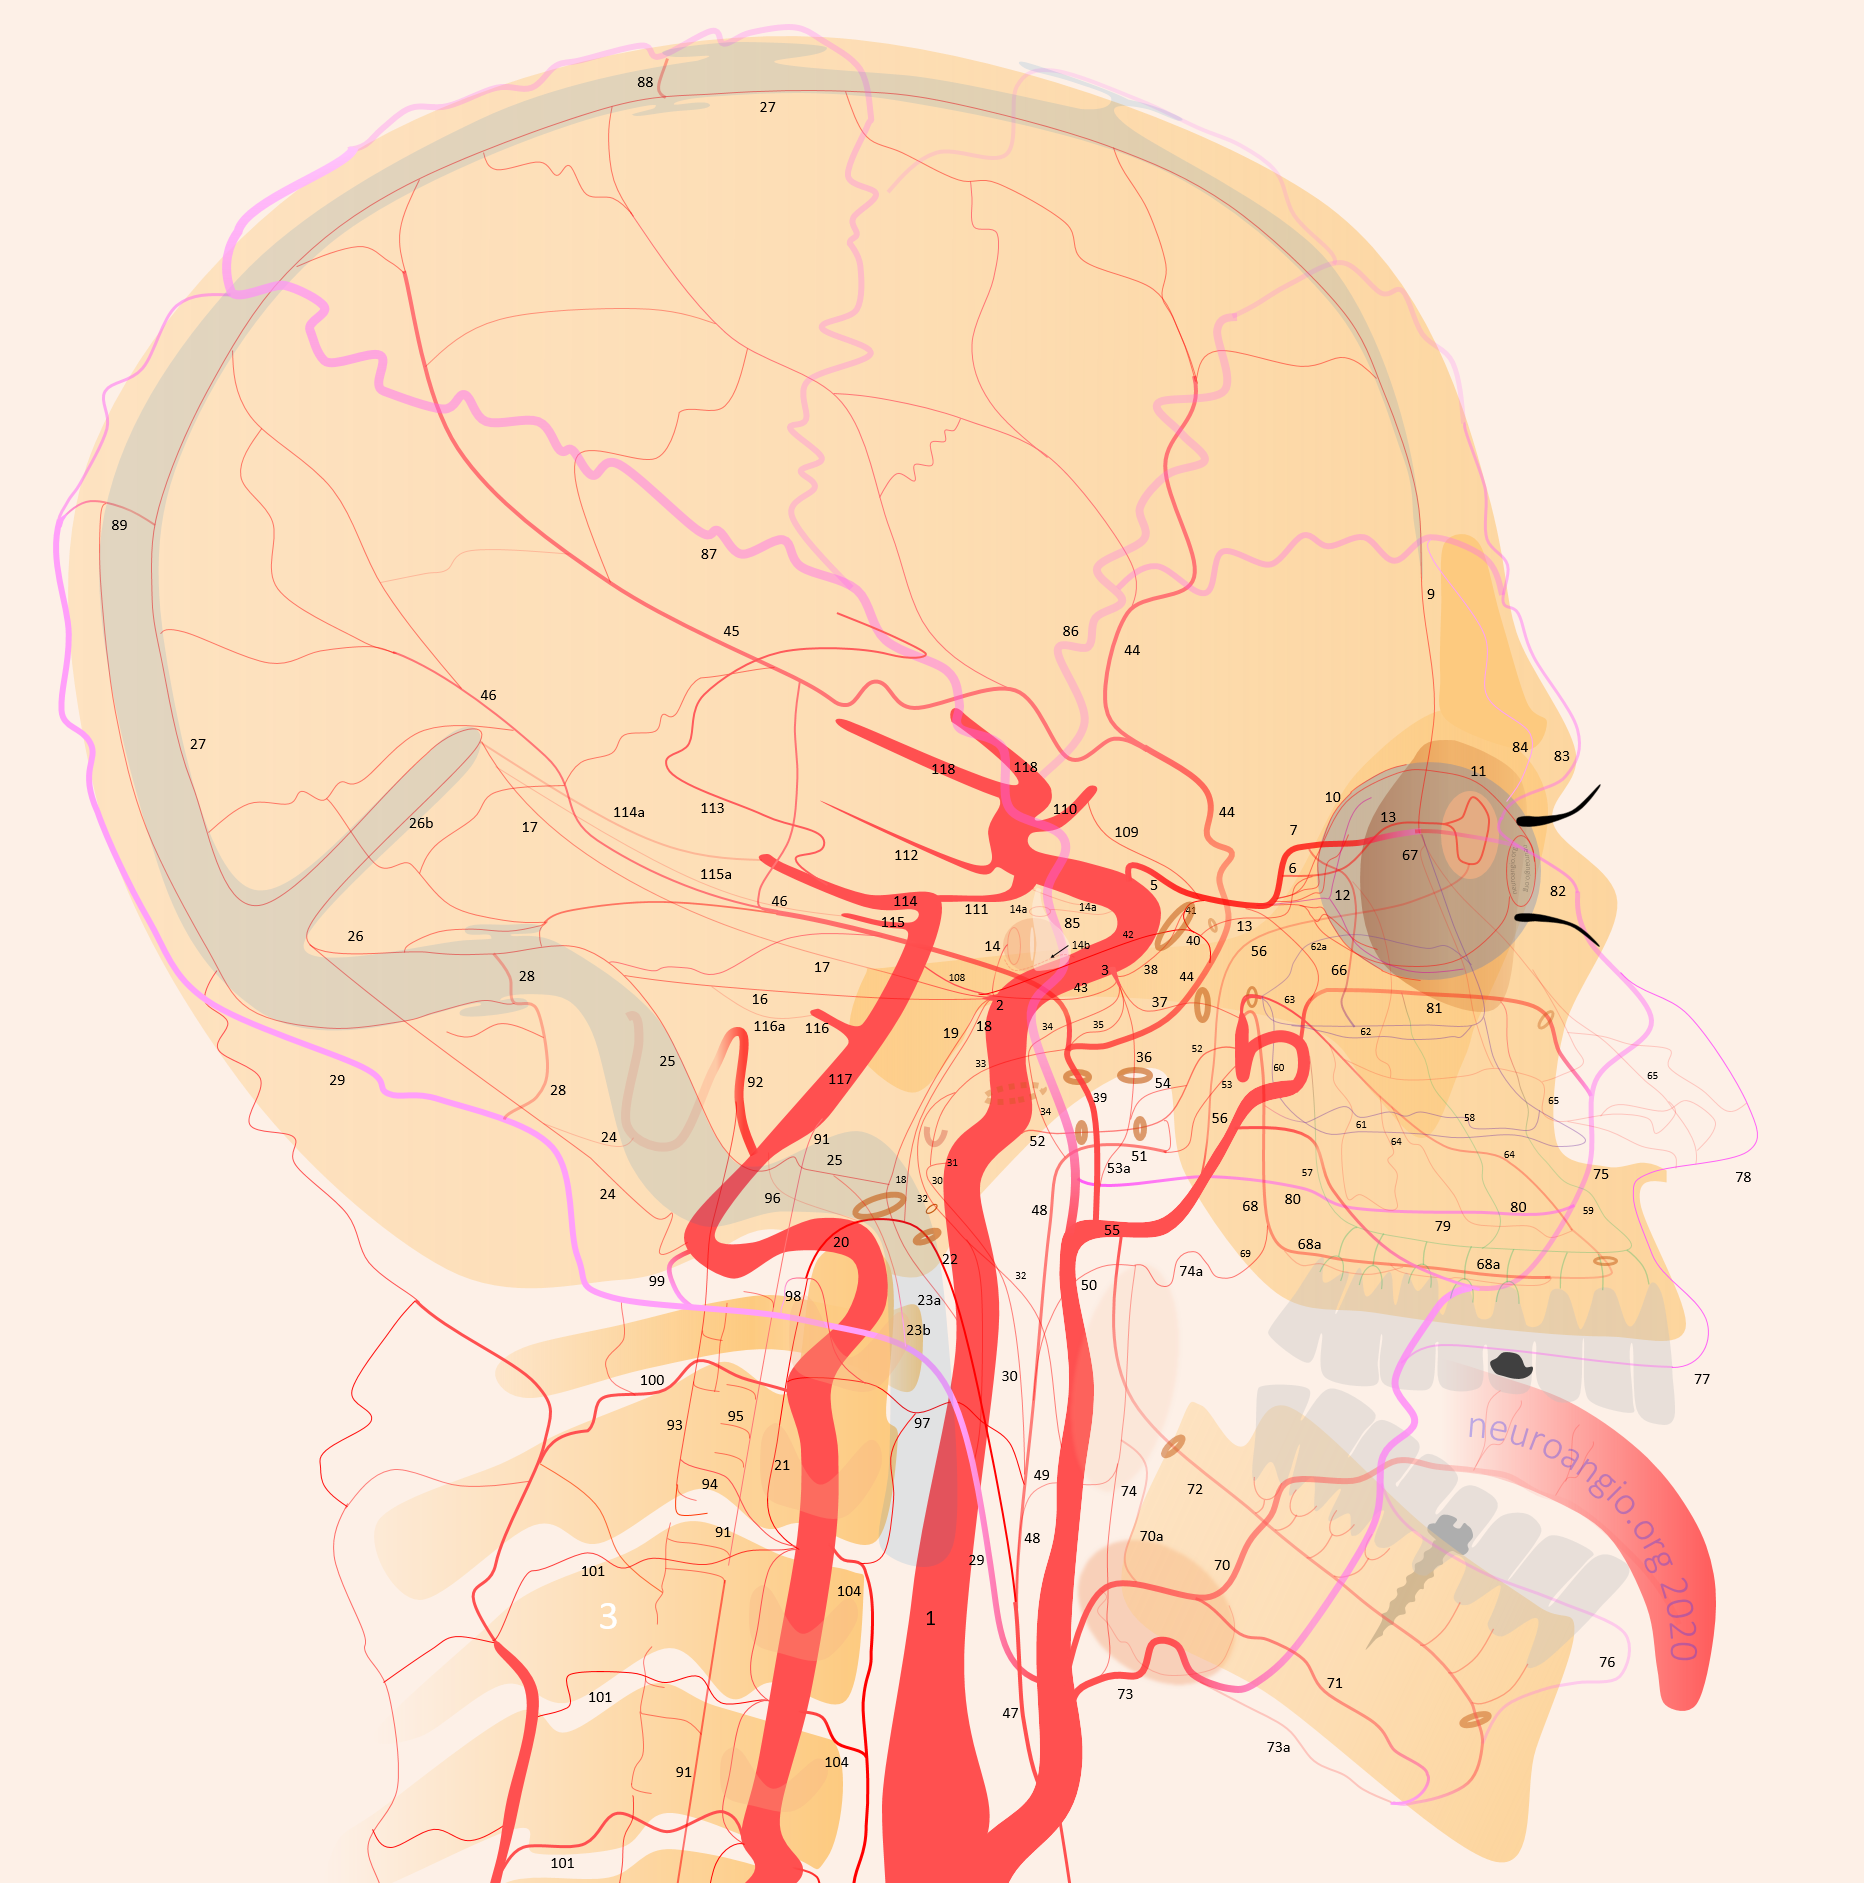 greater occipital nerve and artery